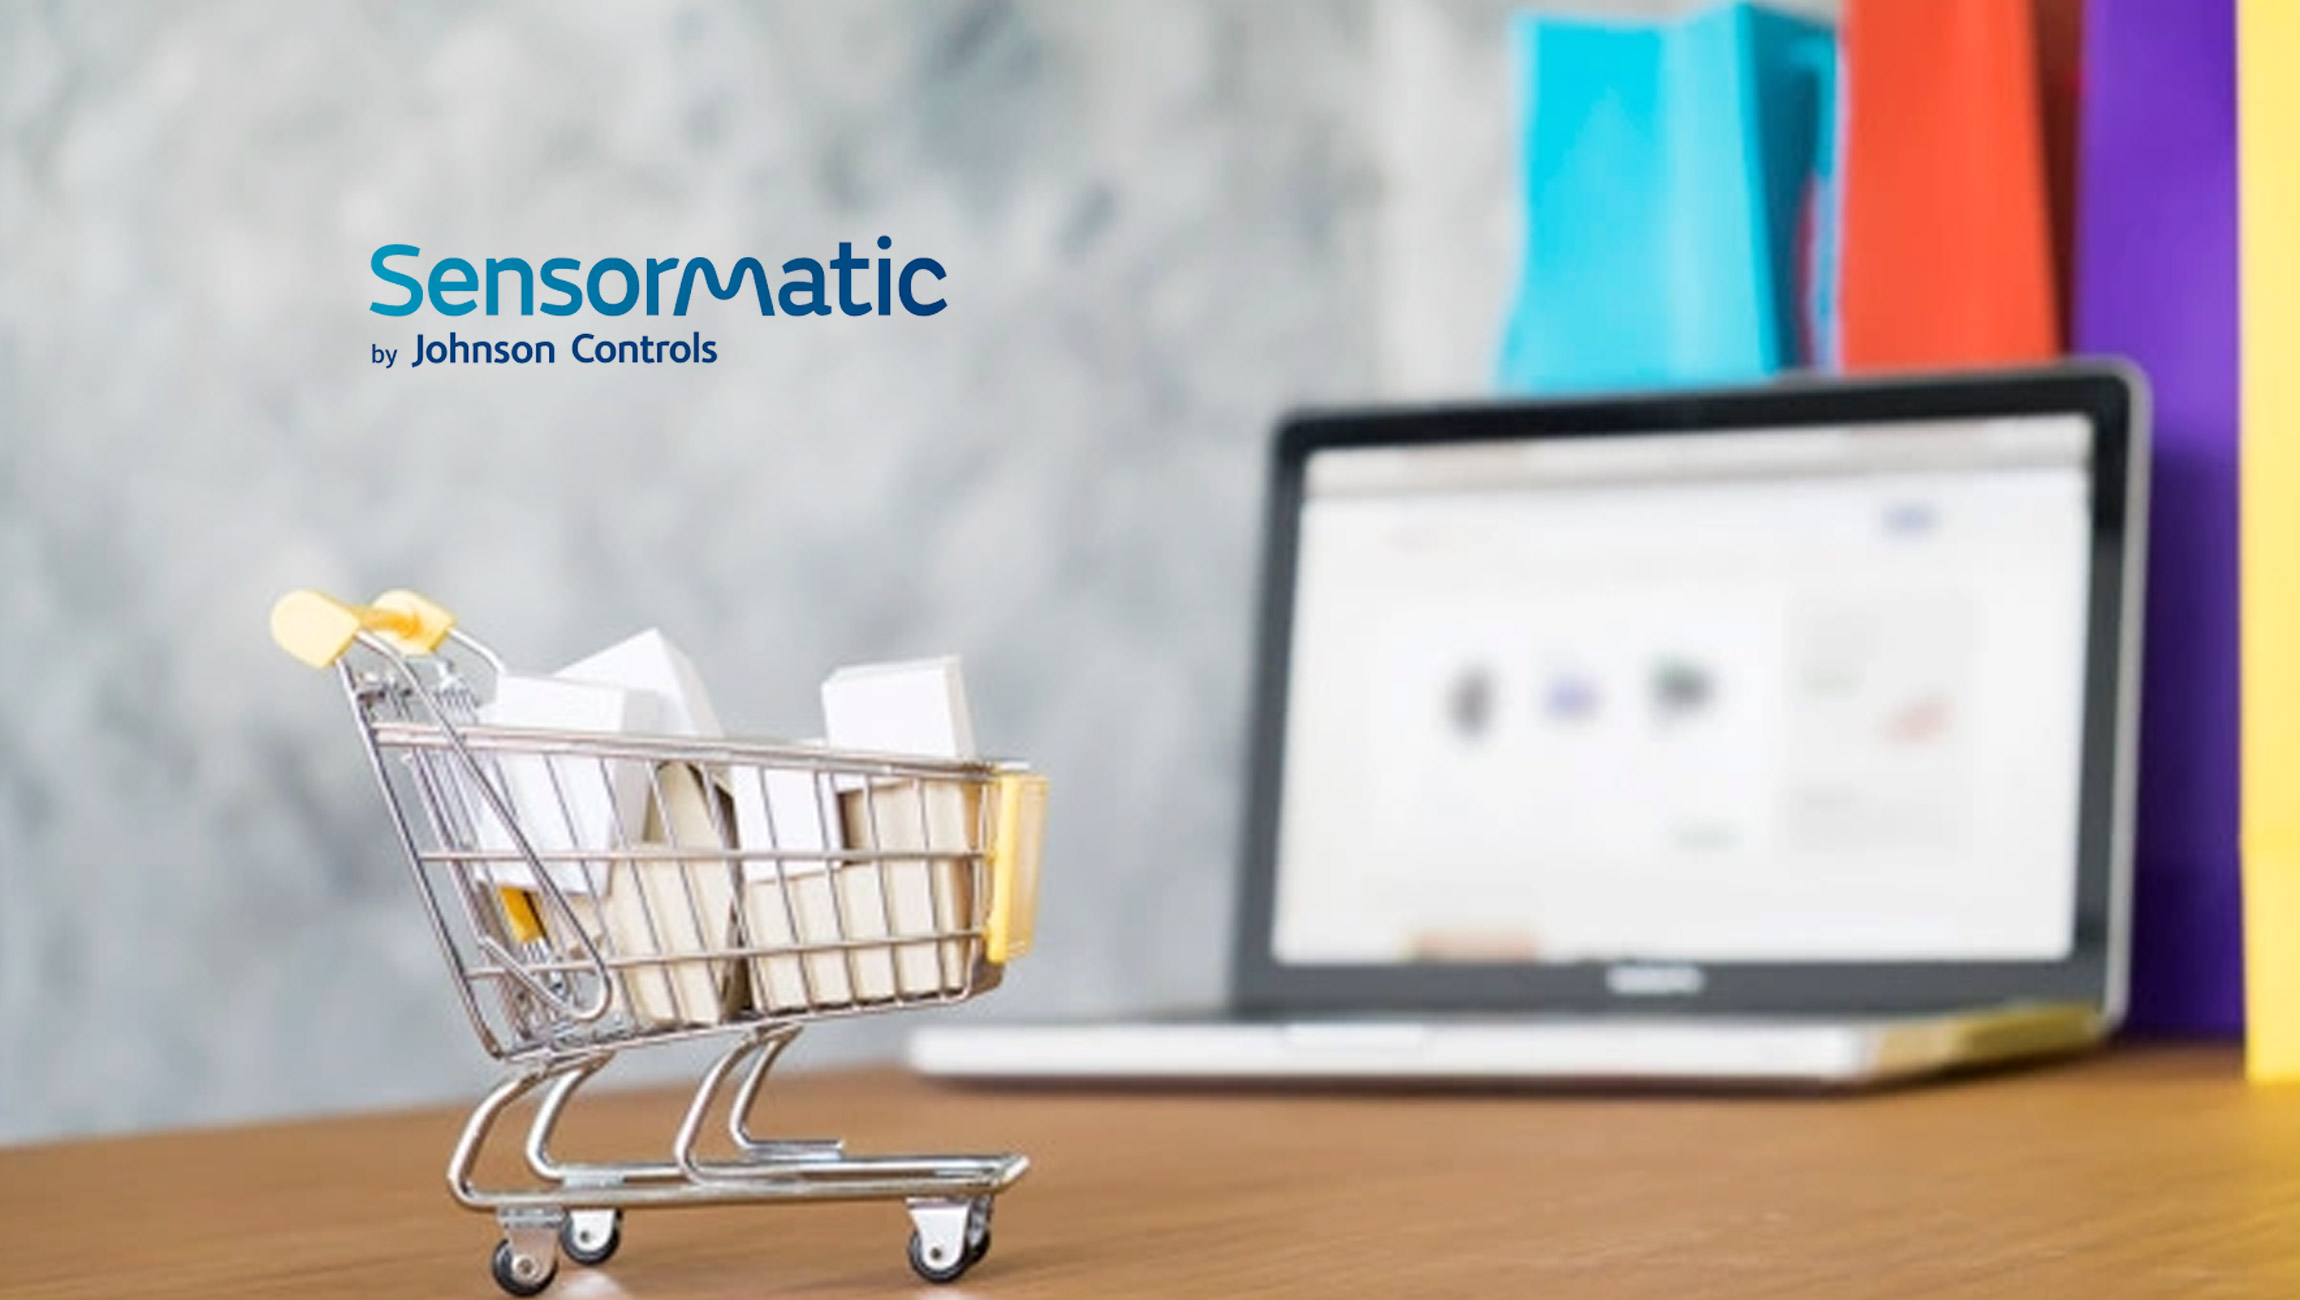 Sensormatic Solutions By Johnson Controls Prioritises Responsible Retail by Continued Focus and Investment Into Sustainability Practices